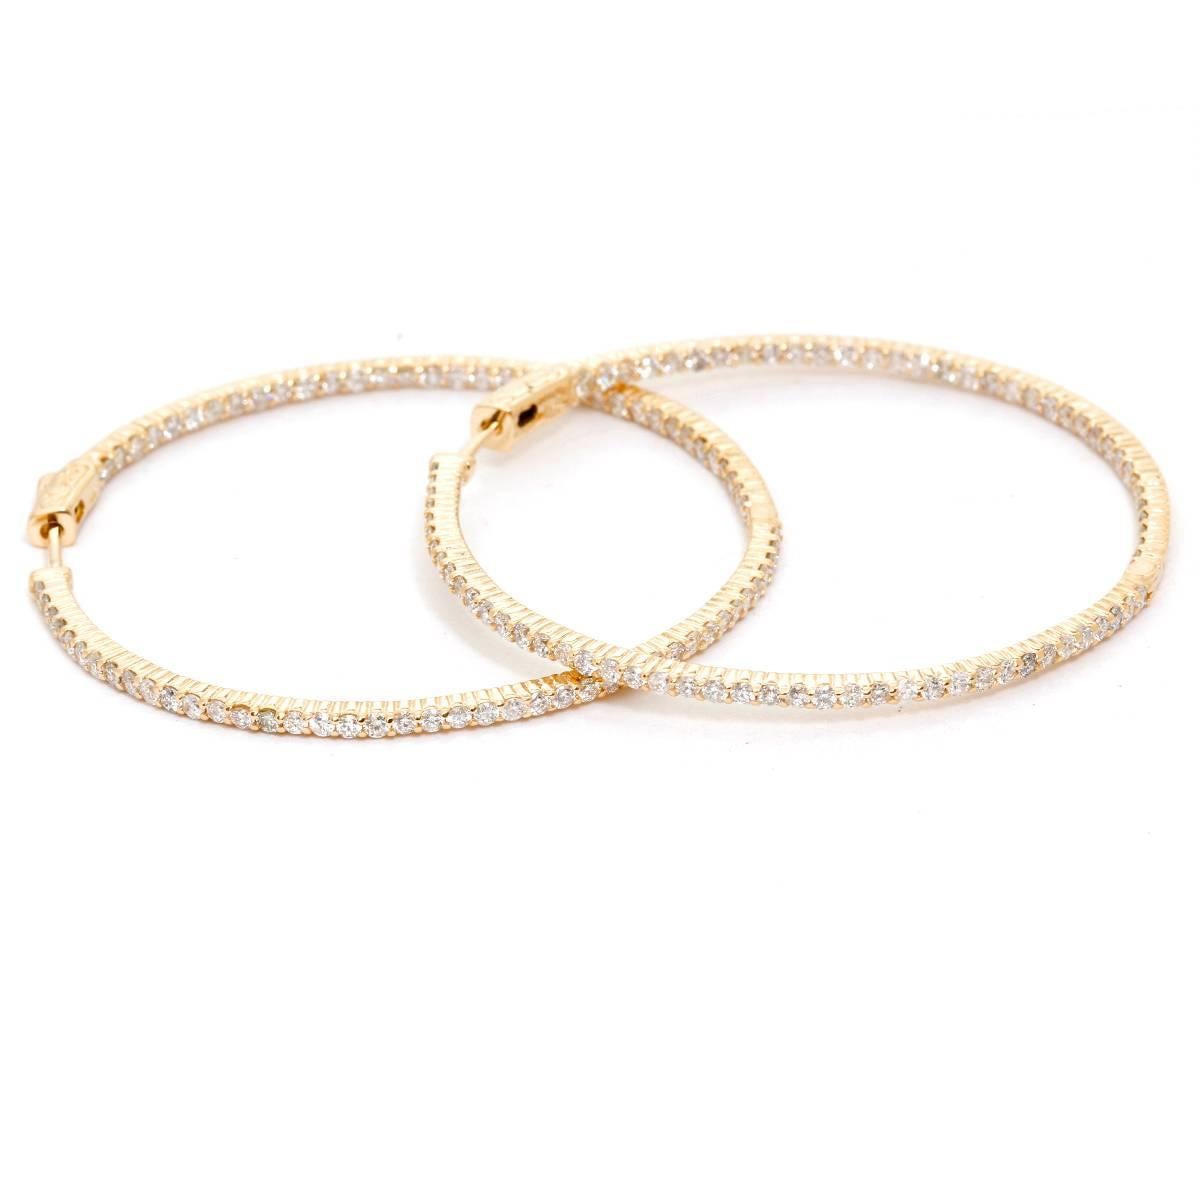 Beautiful Inside Out 18k Yellow Gold hoops - . 18K Yellow gold. 1 3/4  inch diameter, measuring 3 cts diamonds. Clarity I 1. Color GH color. Total weight 9.7 grams.